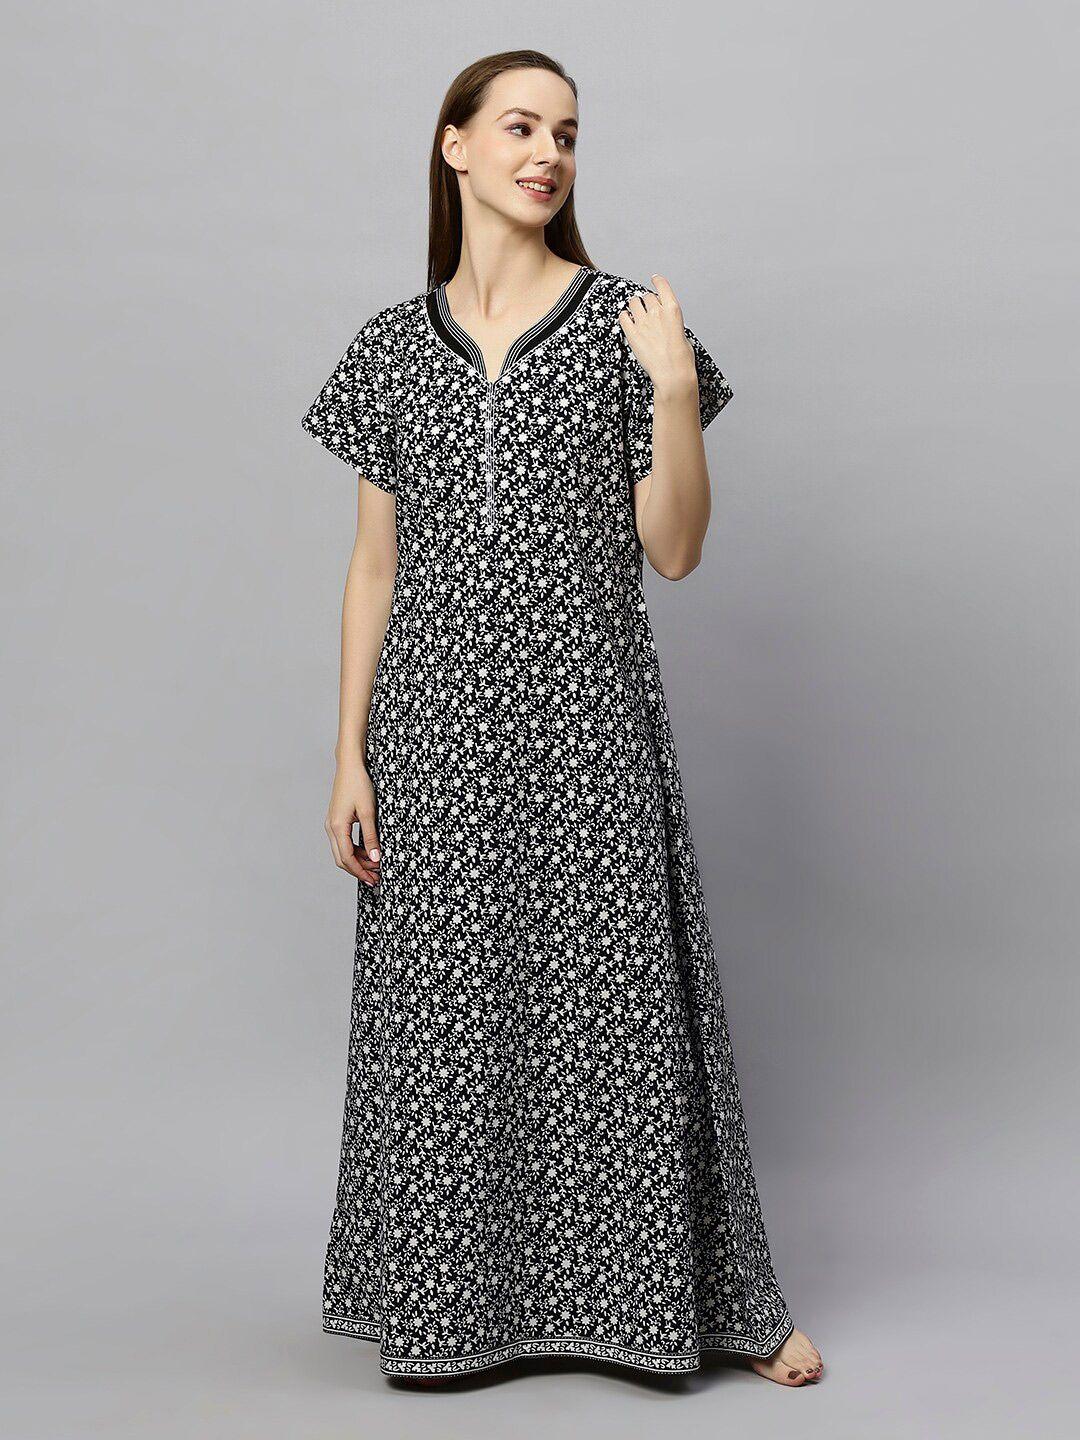 etc black floral printed pure cotton maxi nightdress